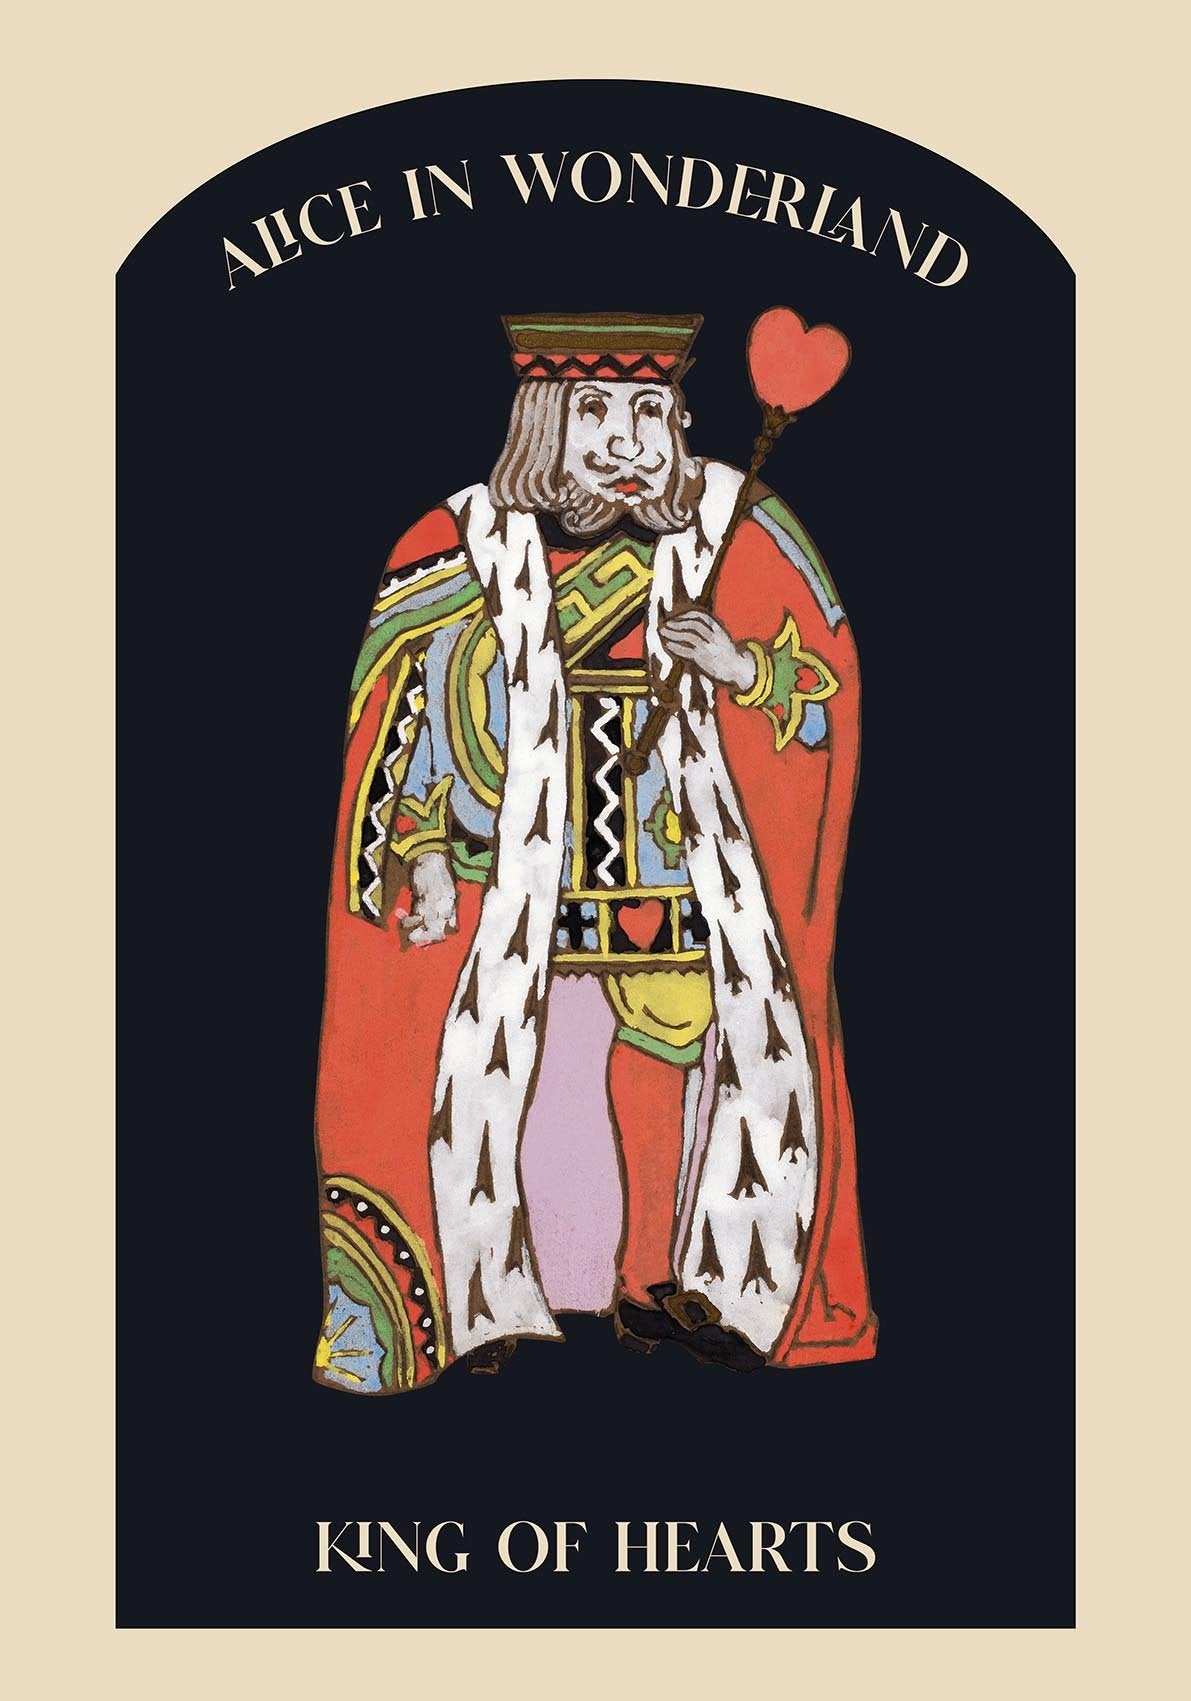 King of Hearts from Alice in Wonderland